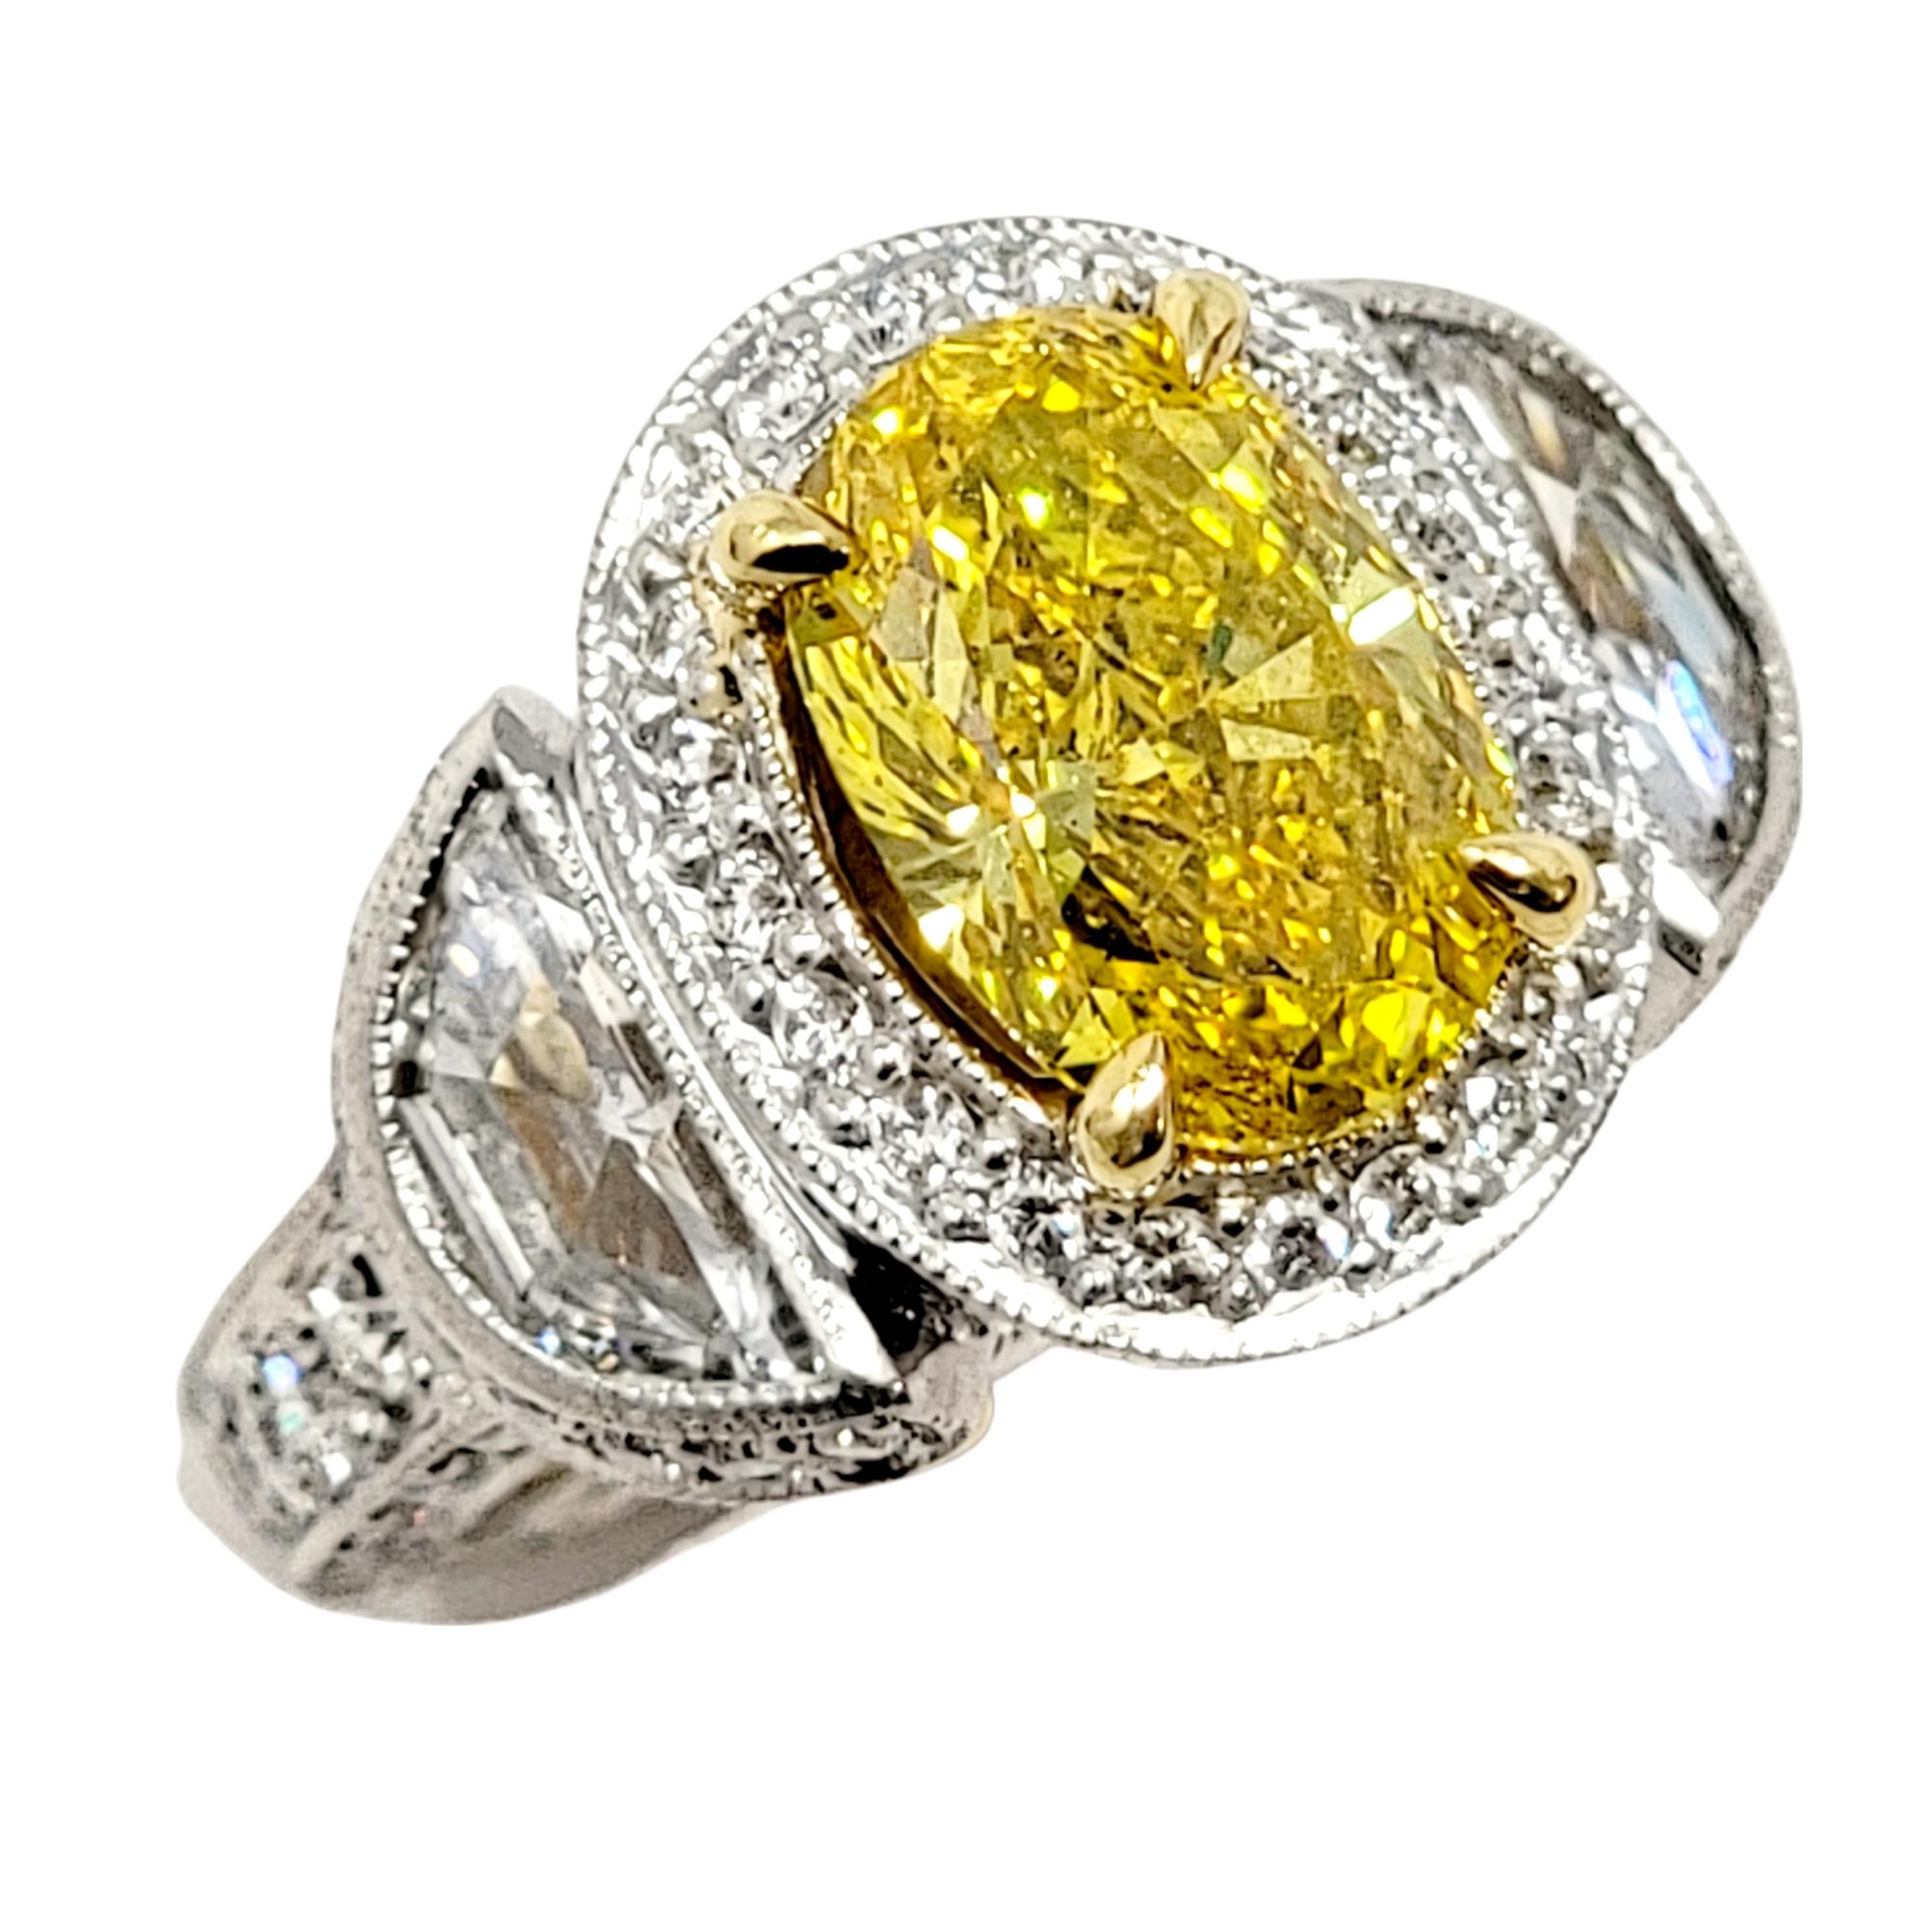 Ring size: 4

This extraordinarily elegant engagement ring will absolutely take your breath away! An exquisite natural yellow diamond is paired with glittering white diamonds for an absolute work of art.  The incredible saturated yellow stone set